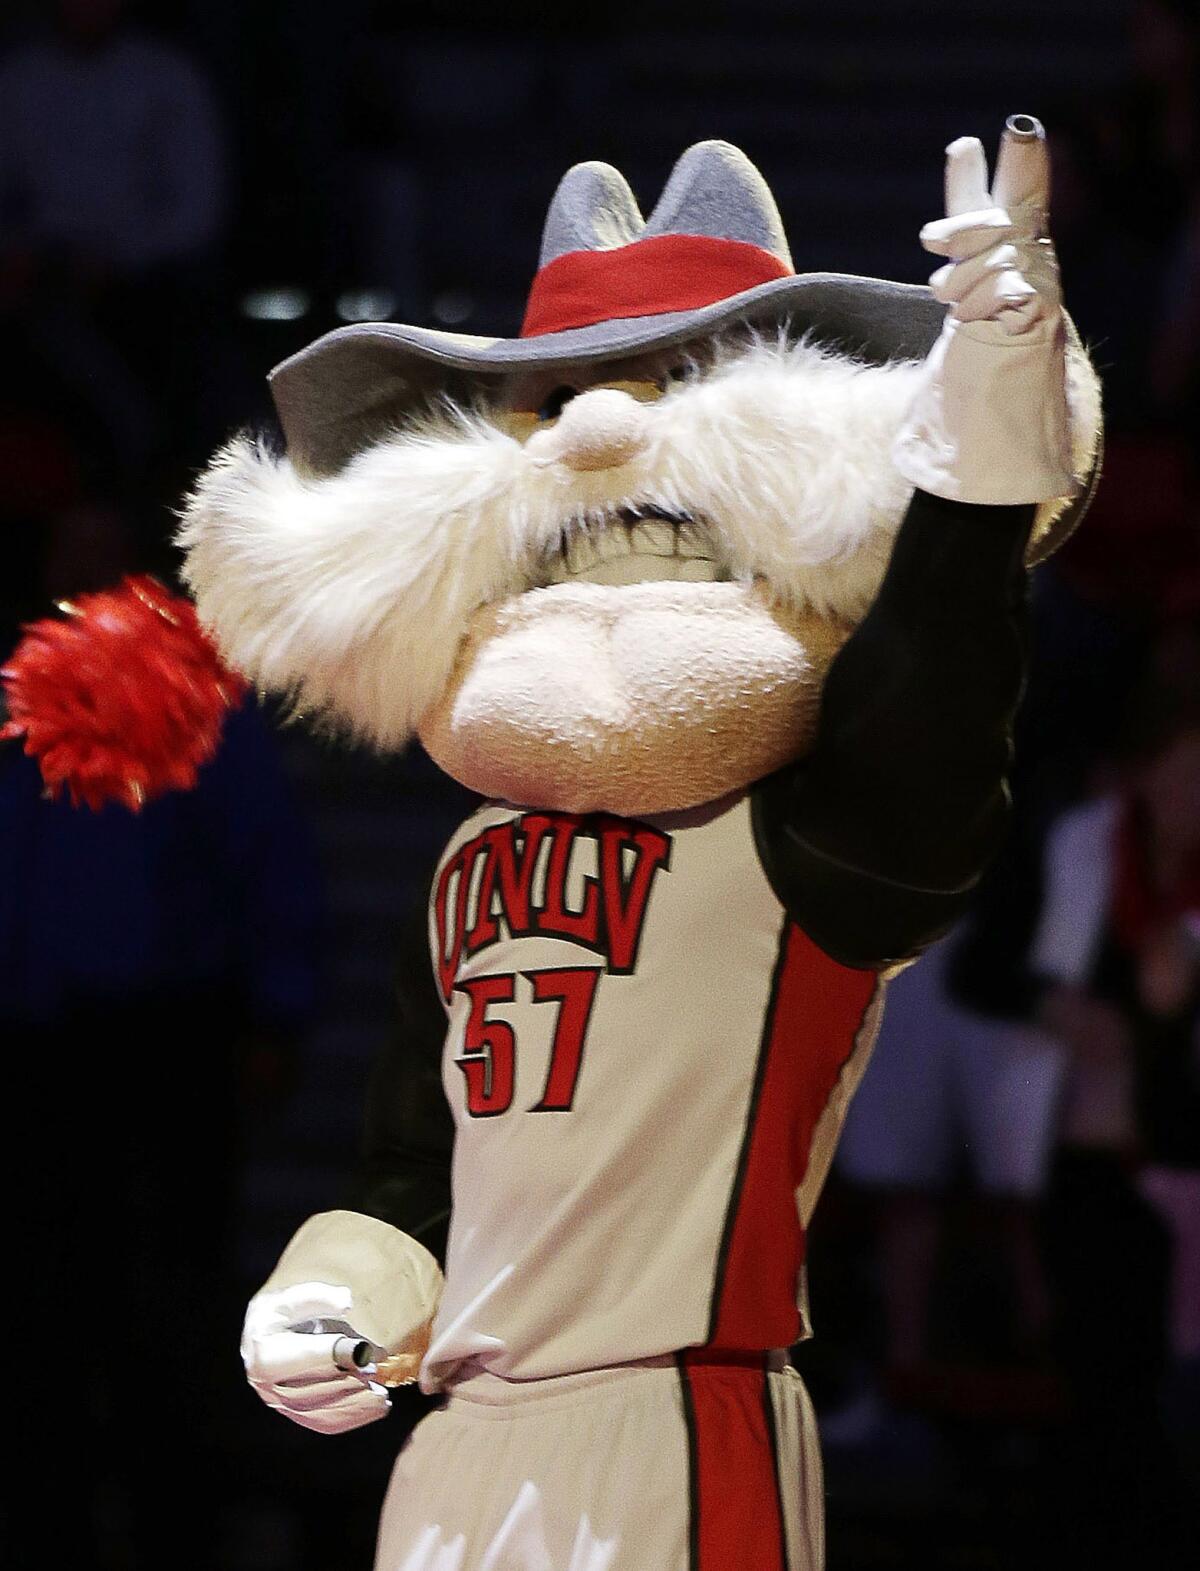 The University of Nevada Las Vegas mascot, Hey Reb! (exclamation mark included), warms up the crowd before a basketball game.